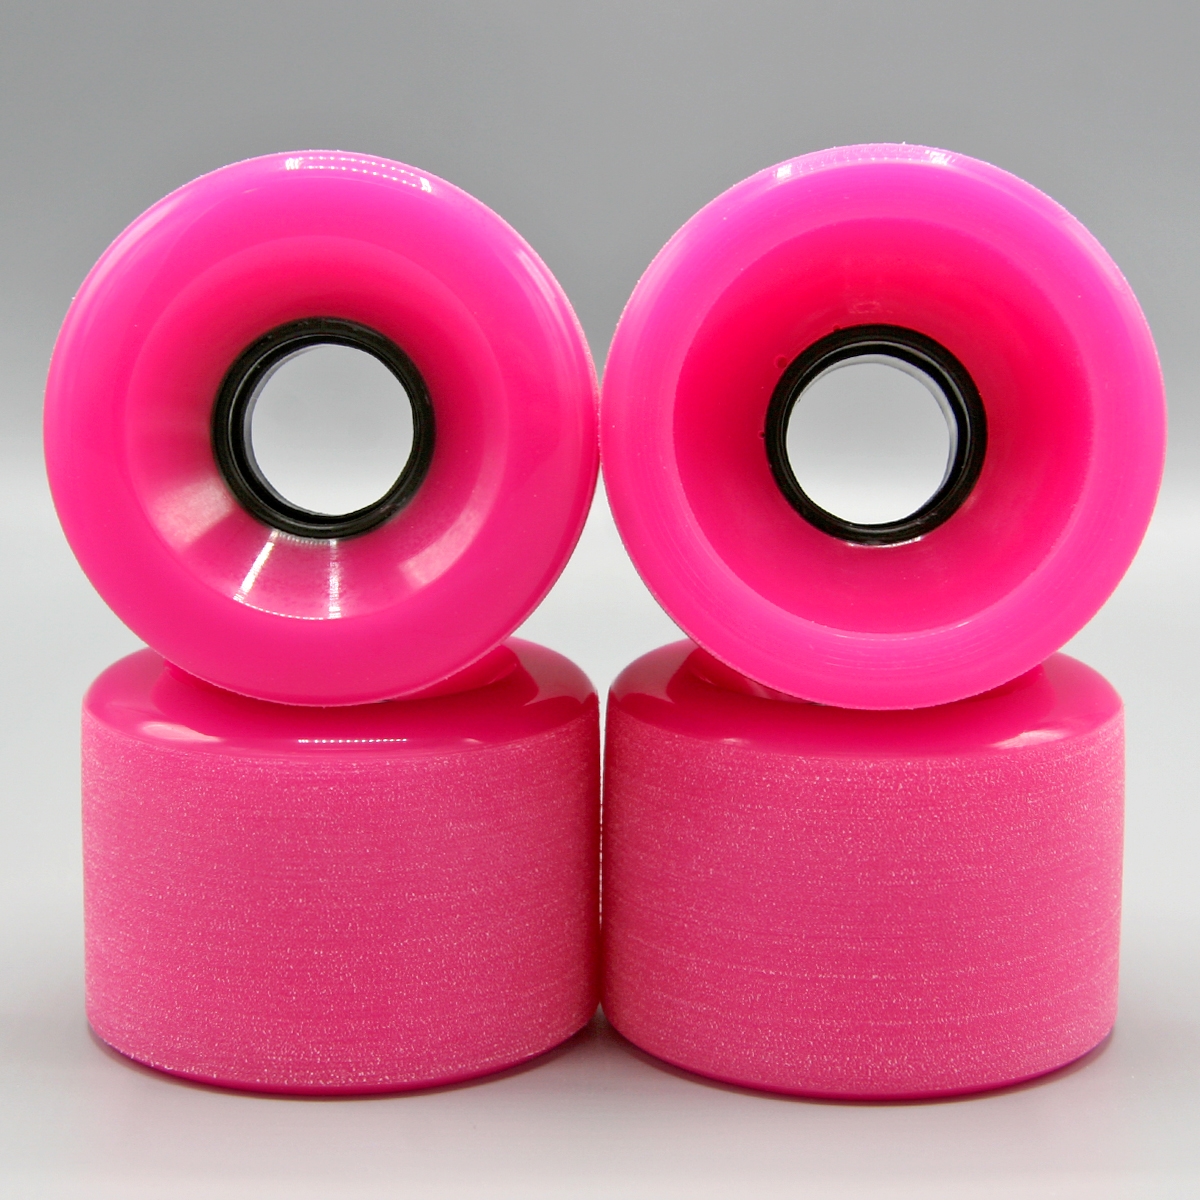 Blank 65mm (Solid Pink) - Includes 1/4" Risers